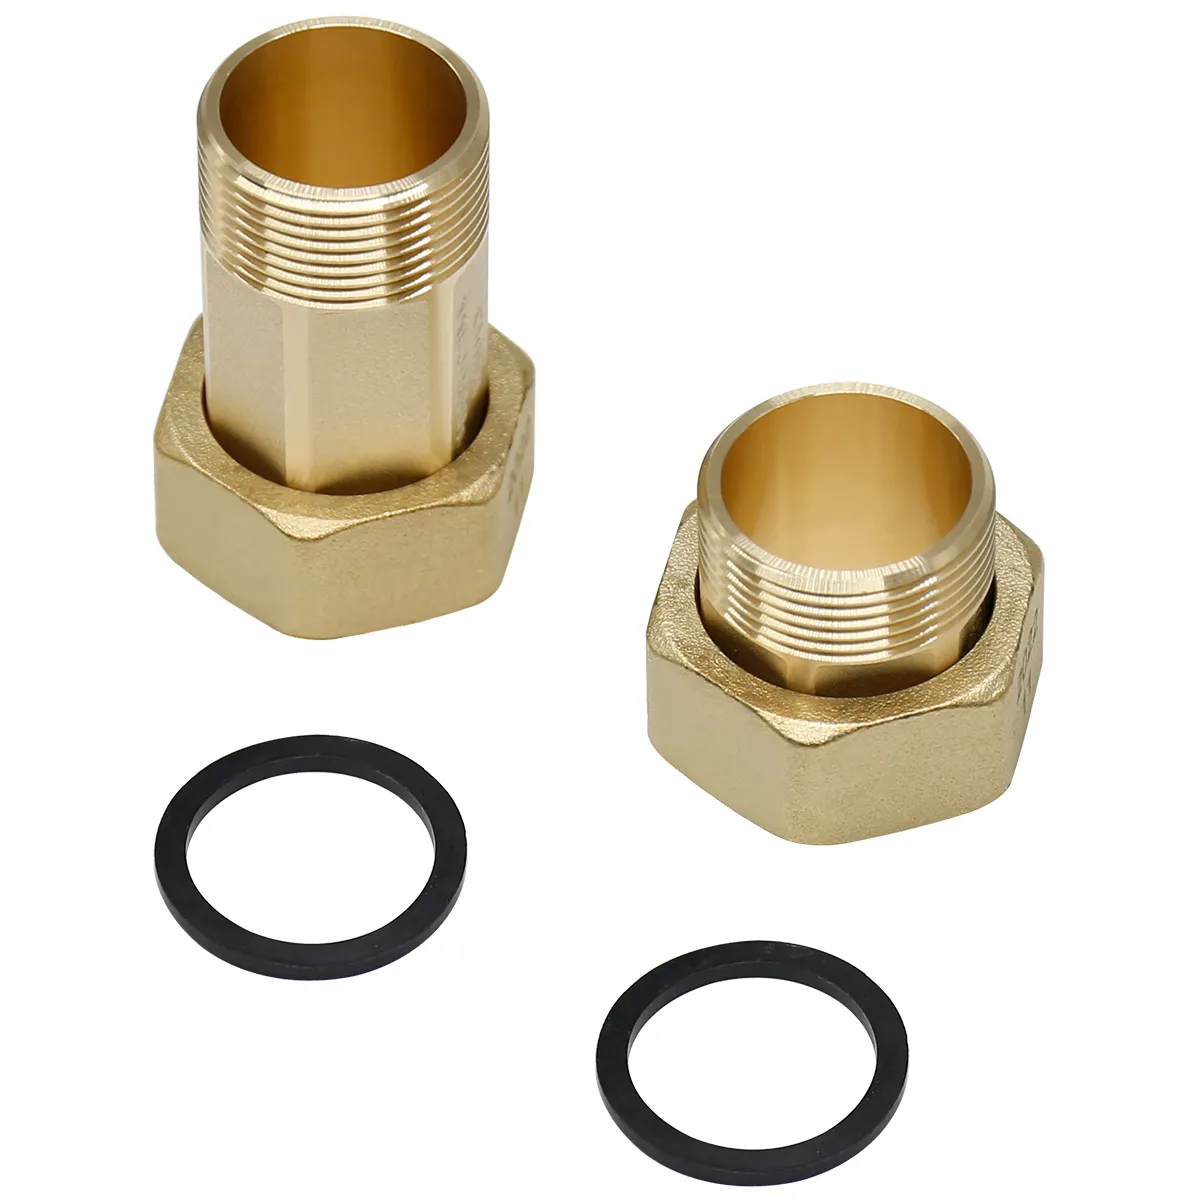 Female and Male Thread Hexagon 1/2 inch to 2 inch Brass Water Meter Coupling